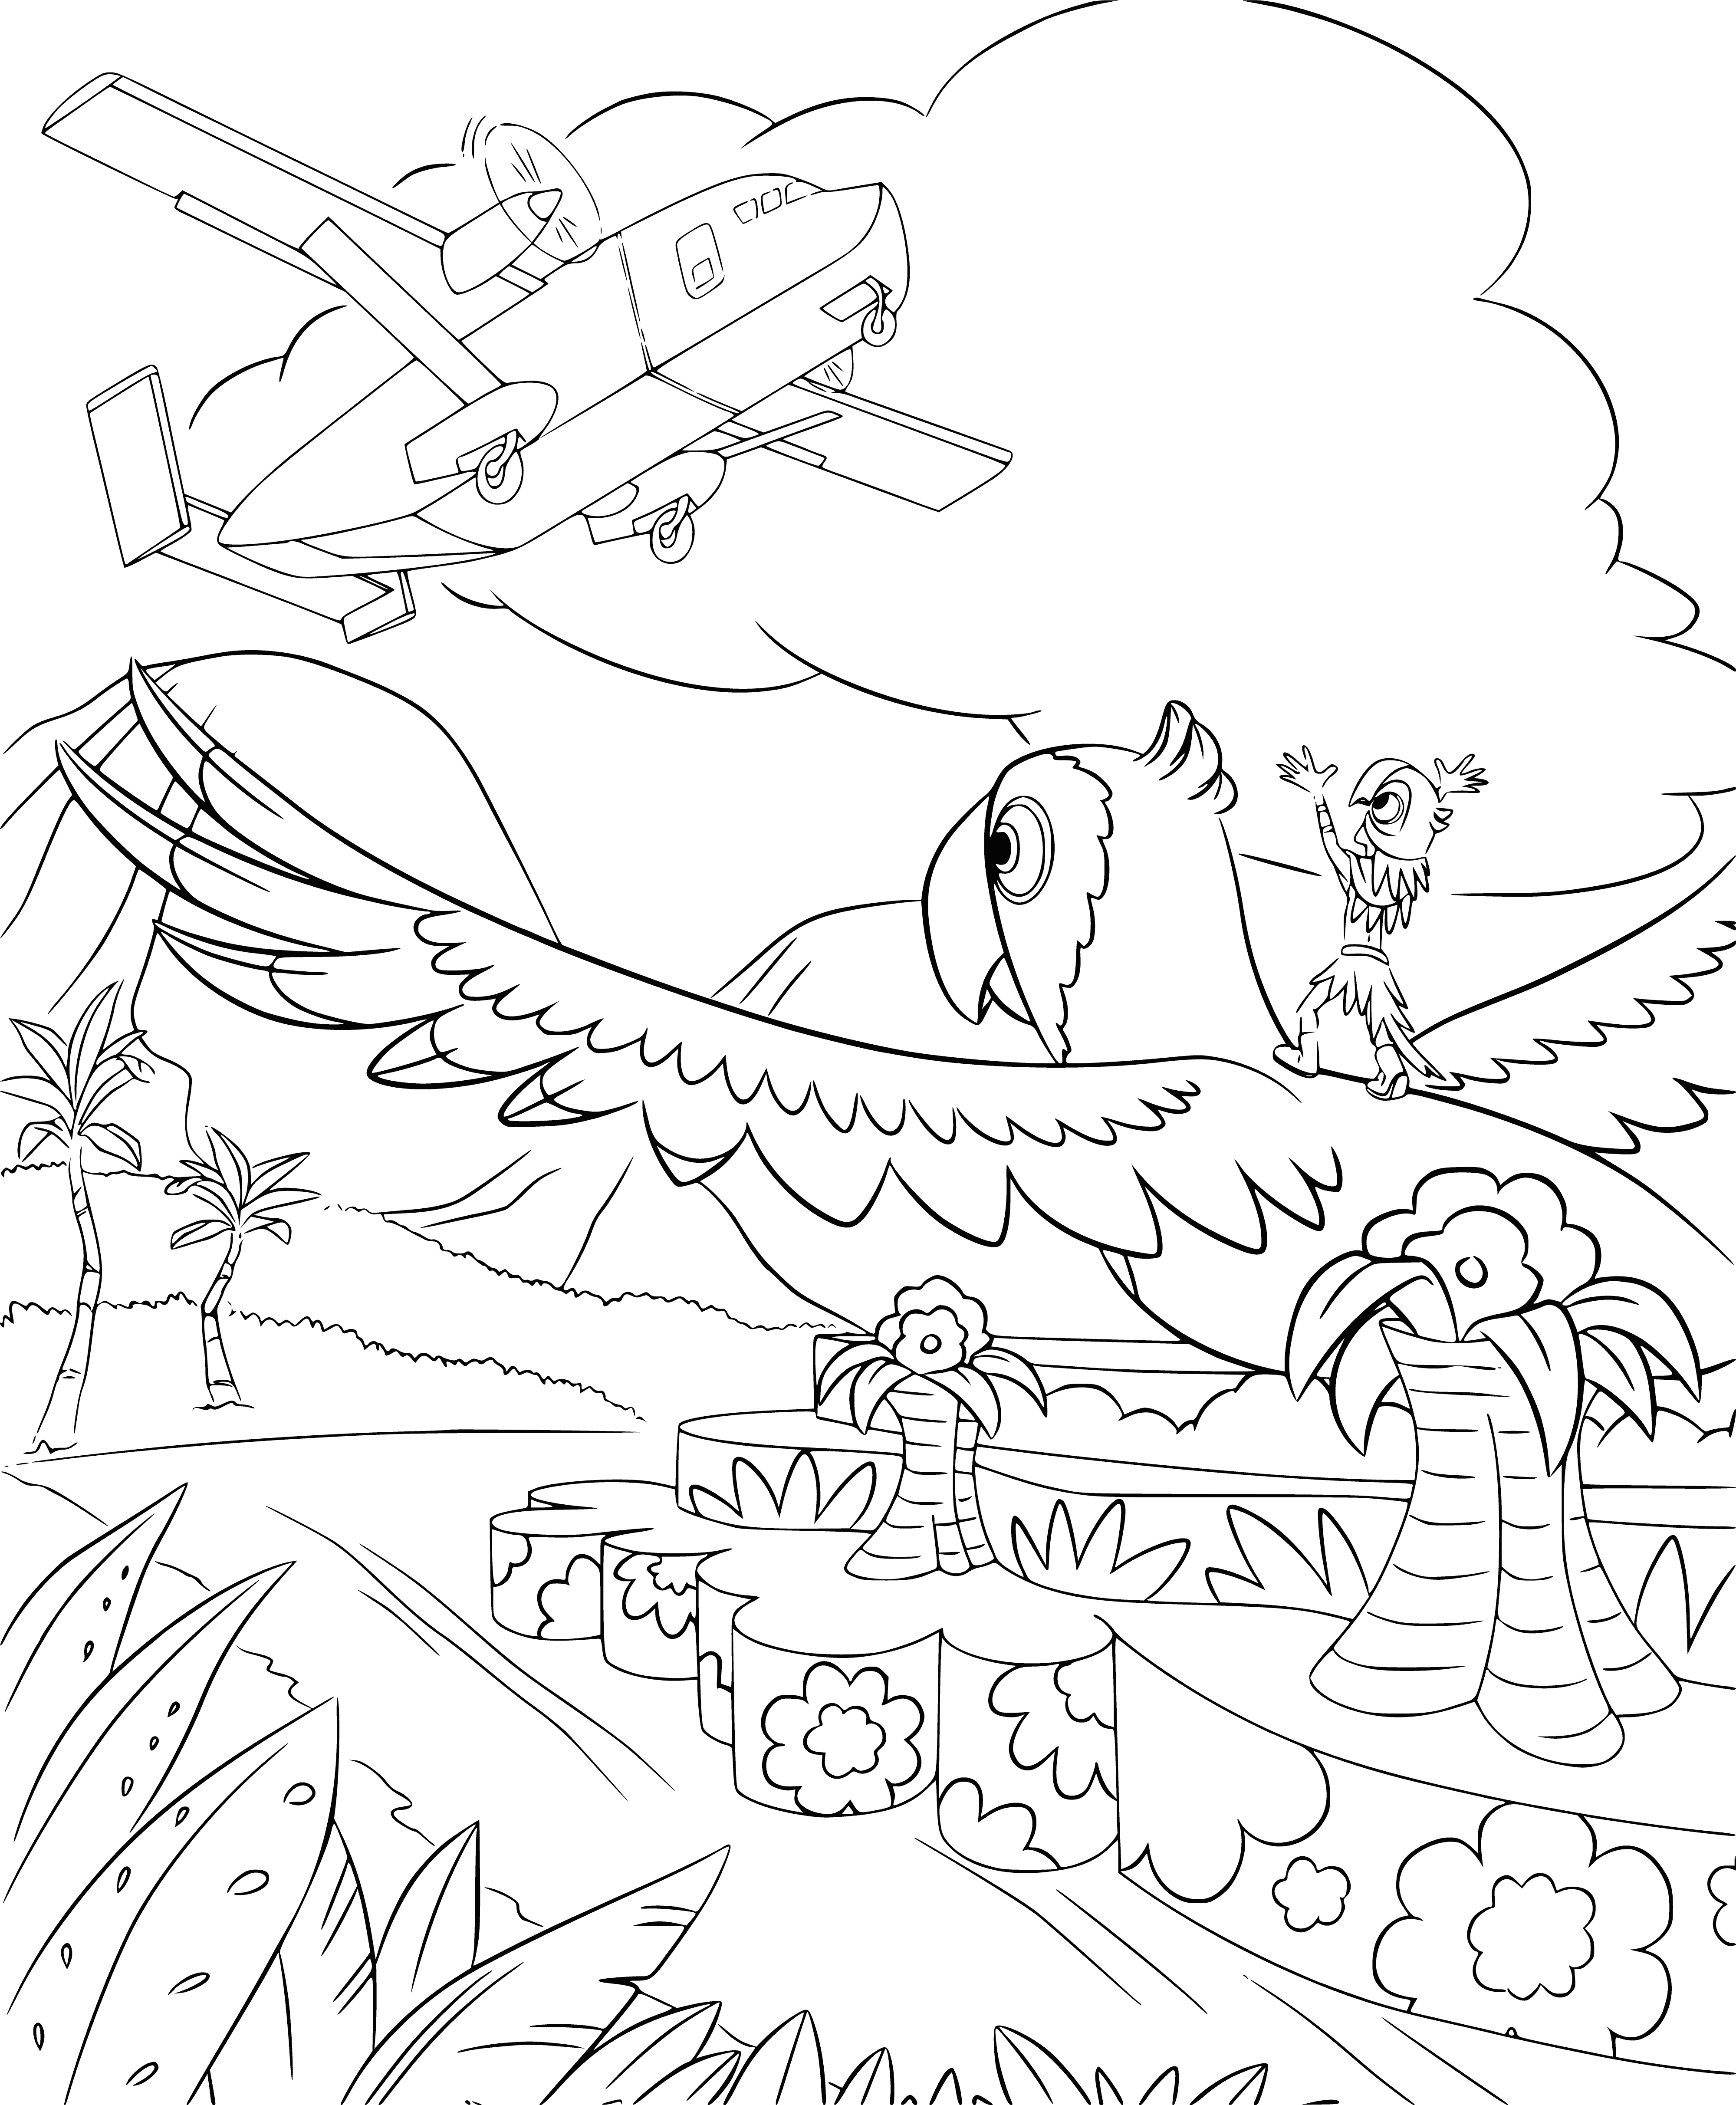 coloring page: People running from huge chicken, screaming in terror as it gets closer.